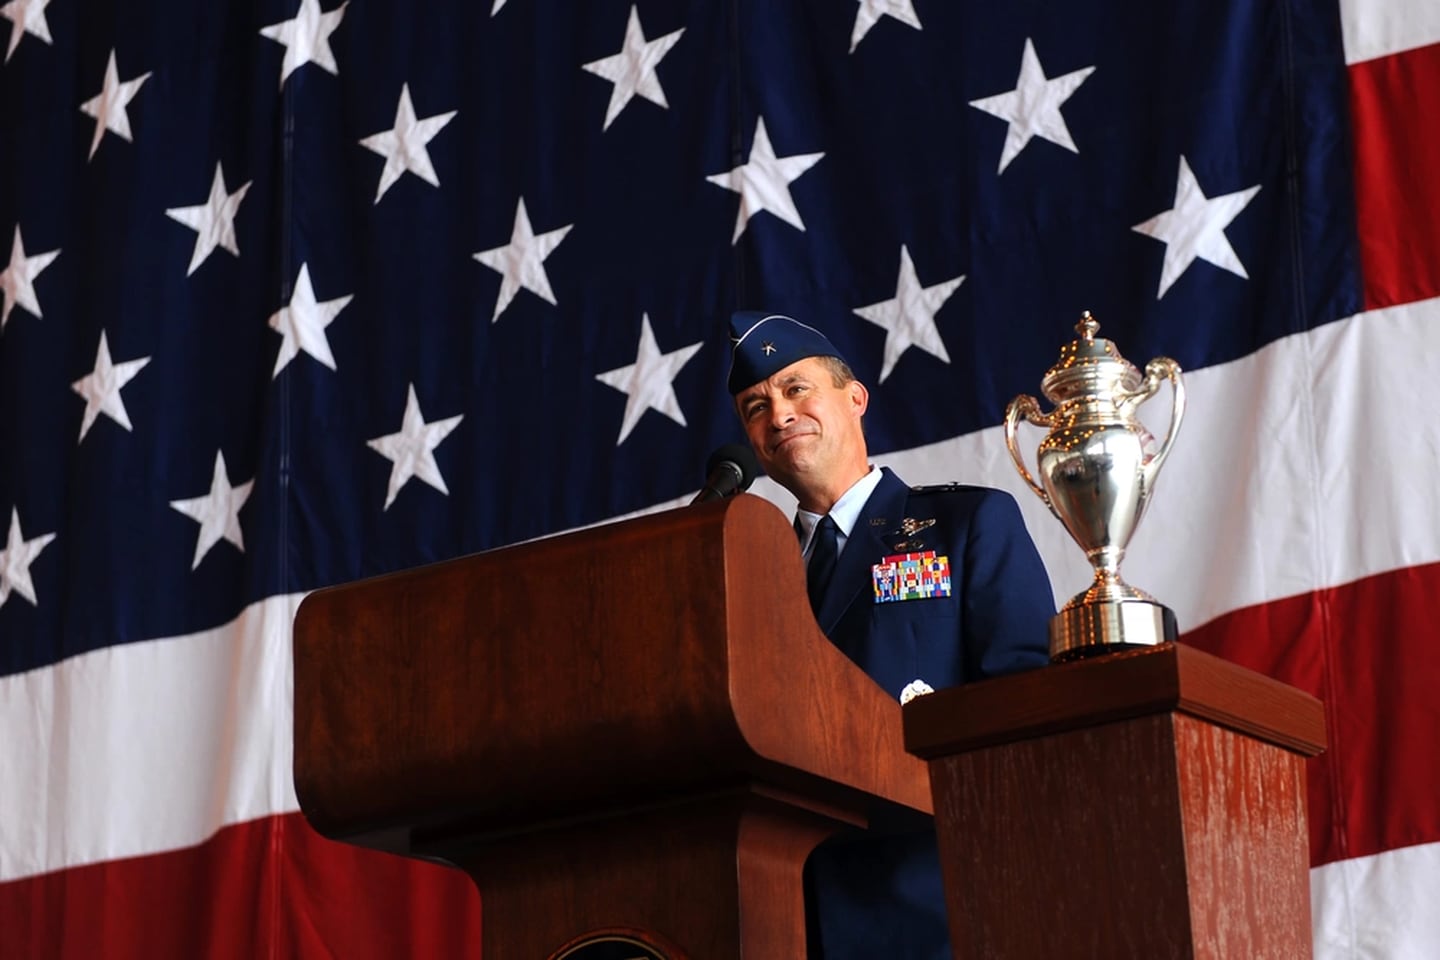 Brig. Gen. Don Bacon, then the outgoing commander of the 55th Wing, gives closing remarks during the change of command ceremony held June 28, 2012, at Offutt Air Force Base, Neb. (Josh Plueger/Air Force)